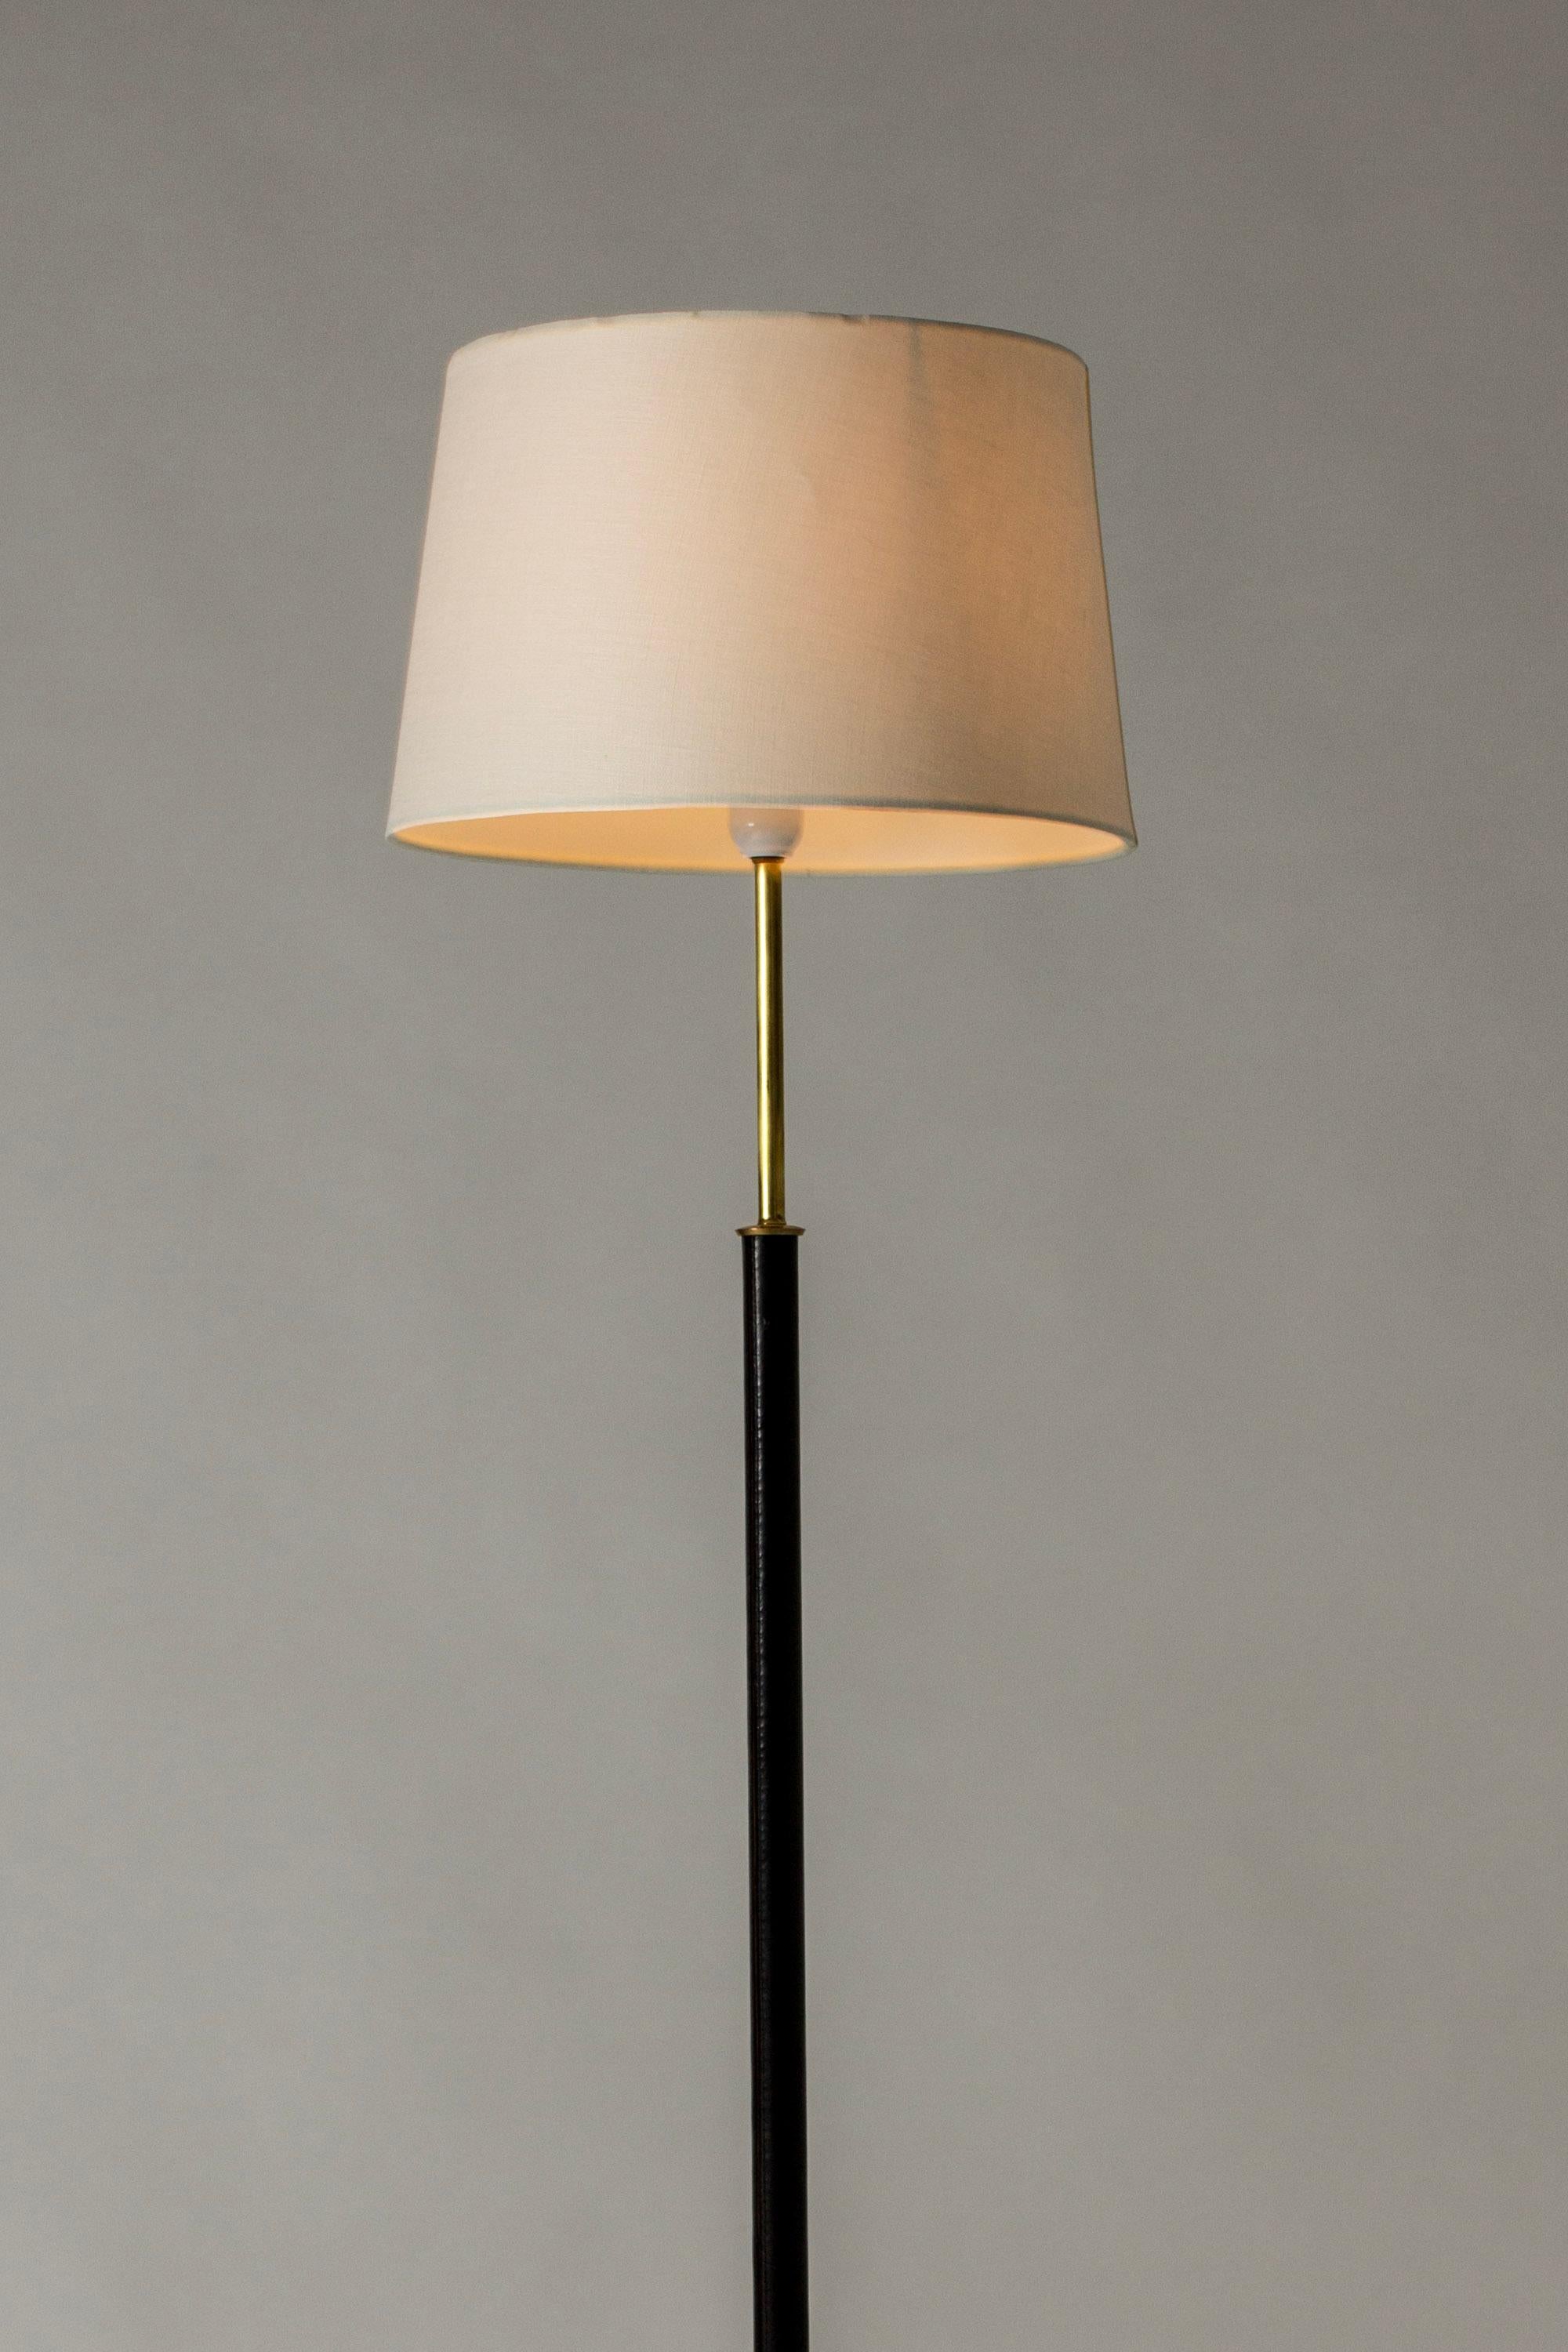 Mid-20th Century Swedish Midcentury Floor Lamp from Bergboms, Sweden, 1950s For Sale